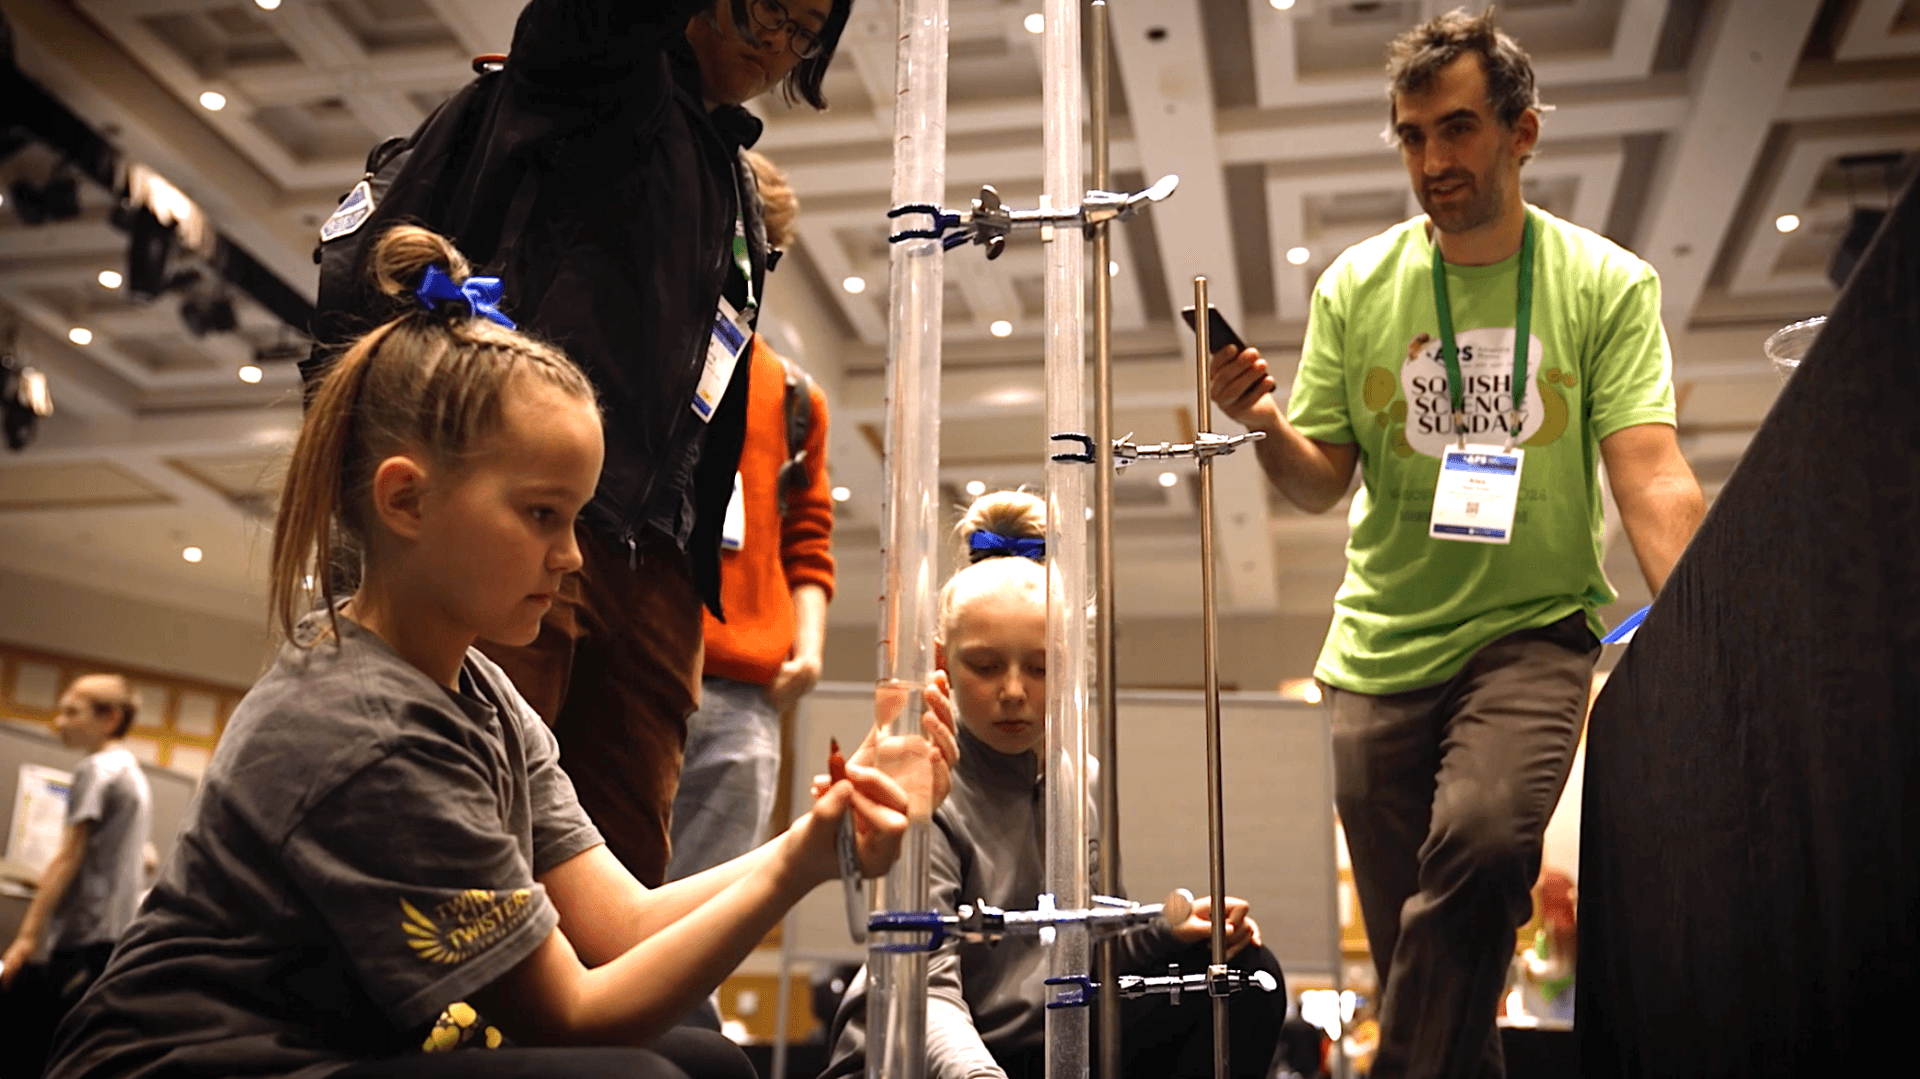 A girl crouches in front of a science instrument as a volunteer looks on.